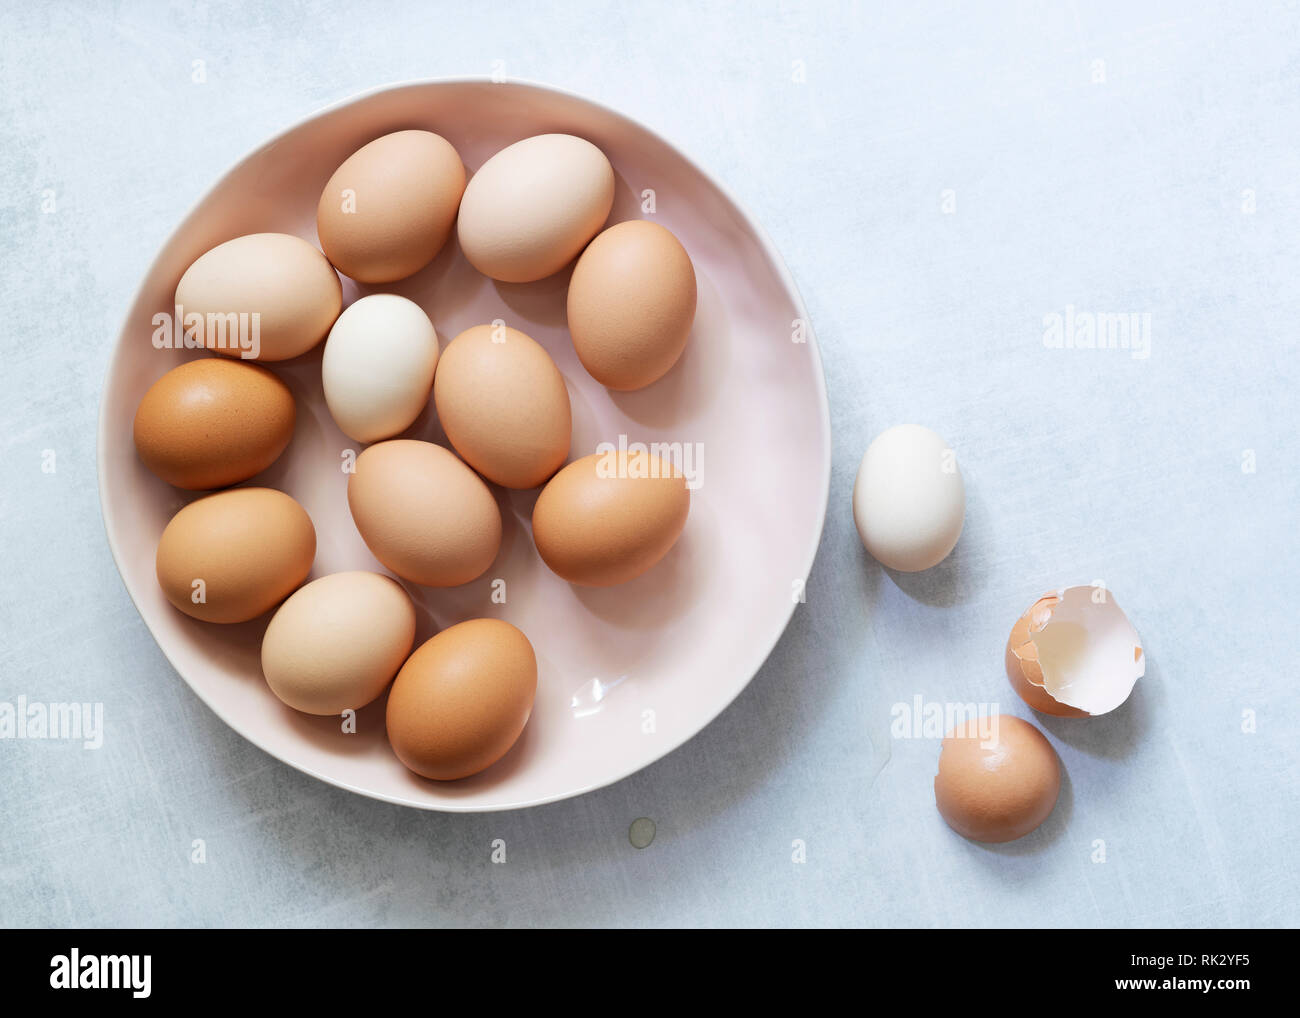 Brown and white eggs in a bowl with egg shells at the side. Stock Photo